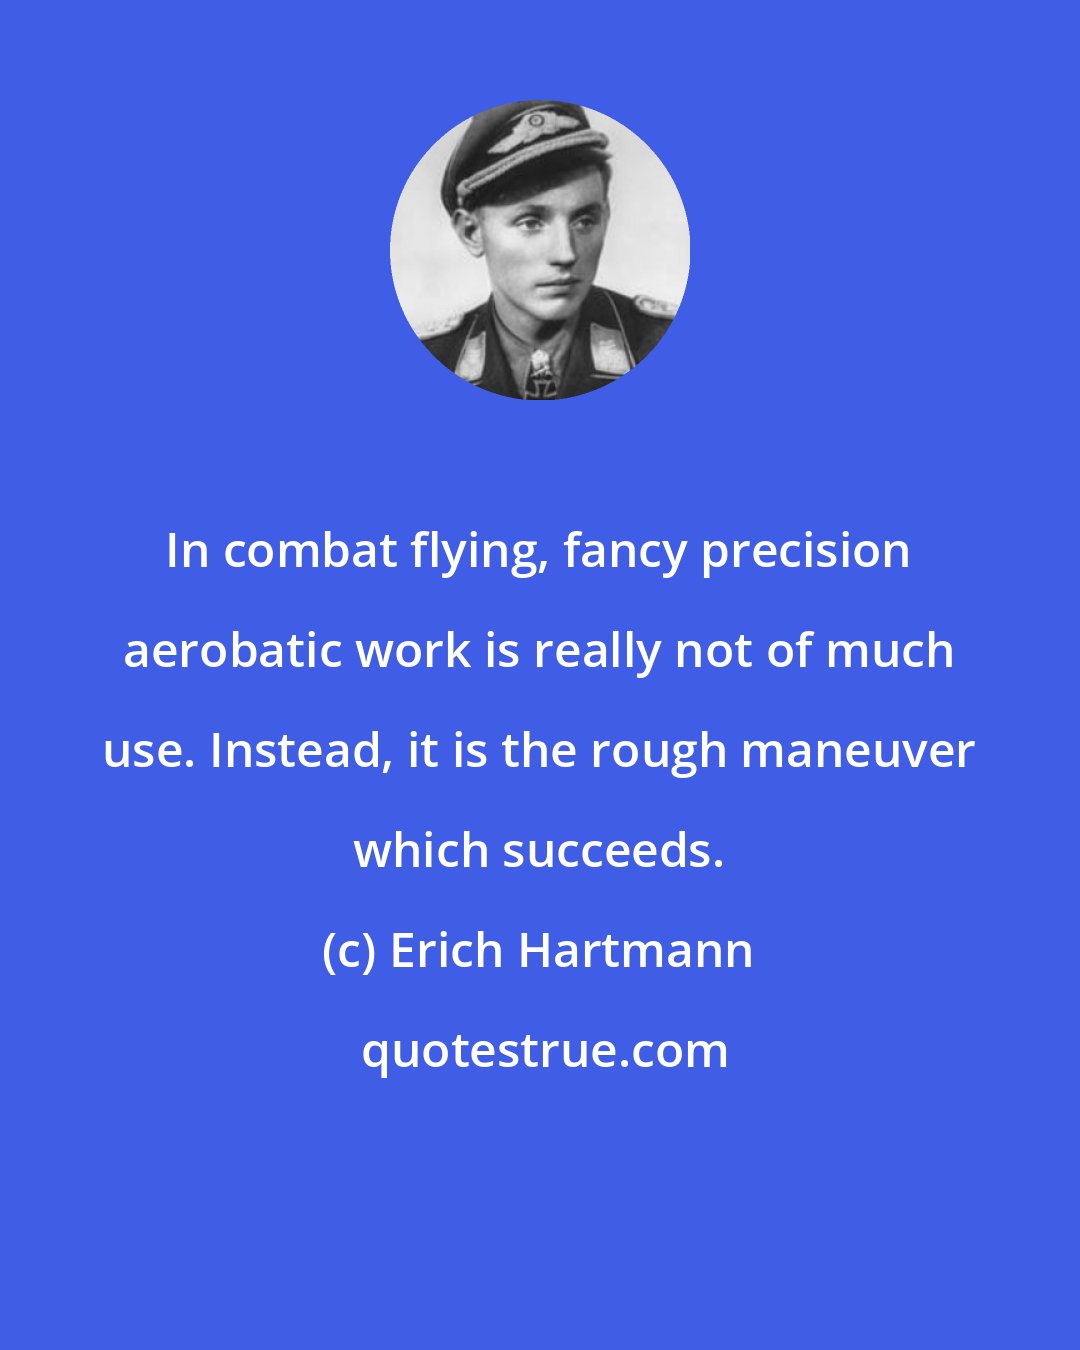 Erich Hartmann: In combat flying, fancy precision aerobatic work is really not of much use. Instead, it is the rough maneuver which succeeds.